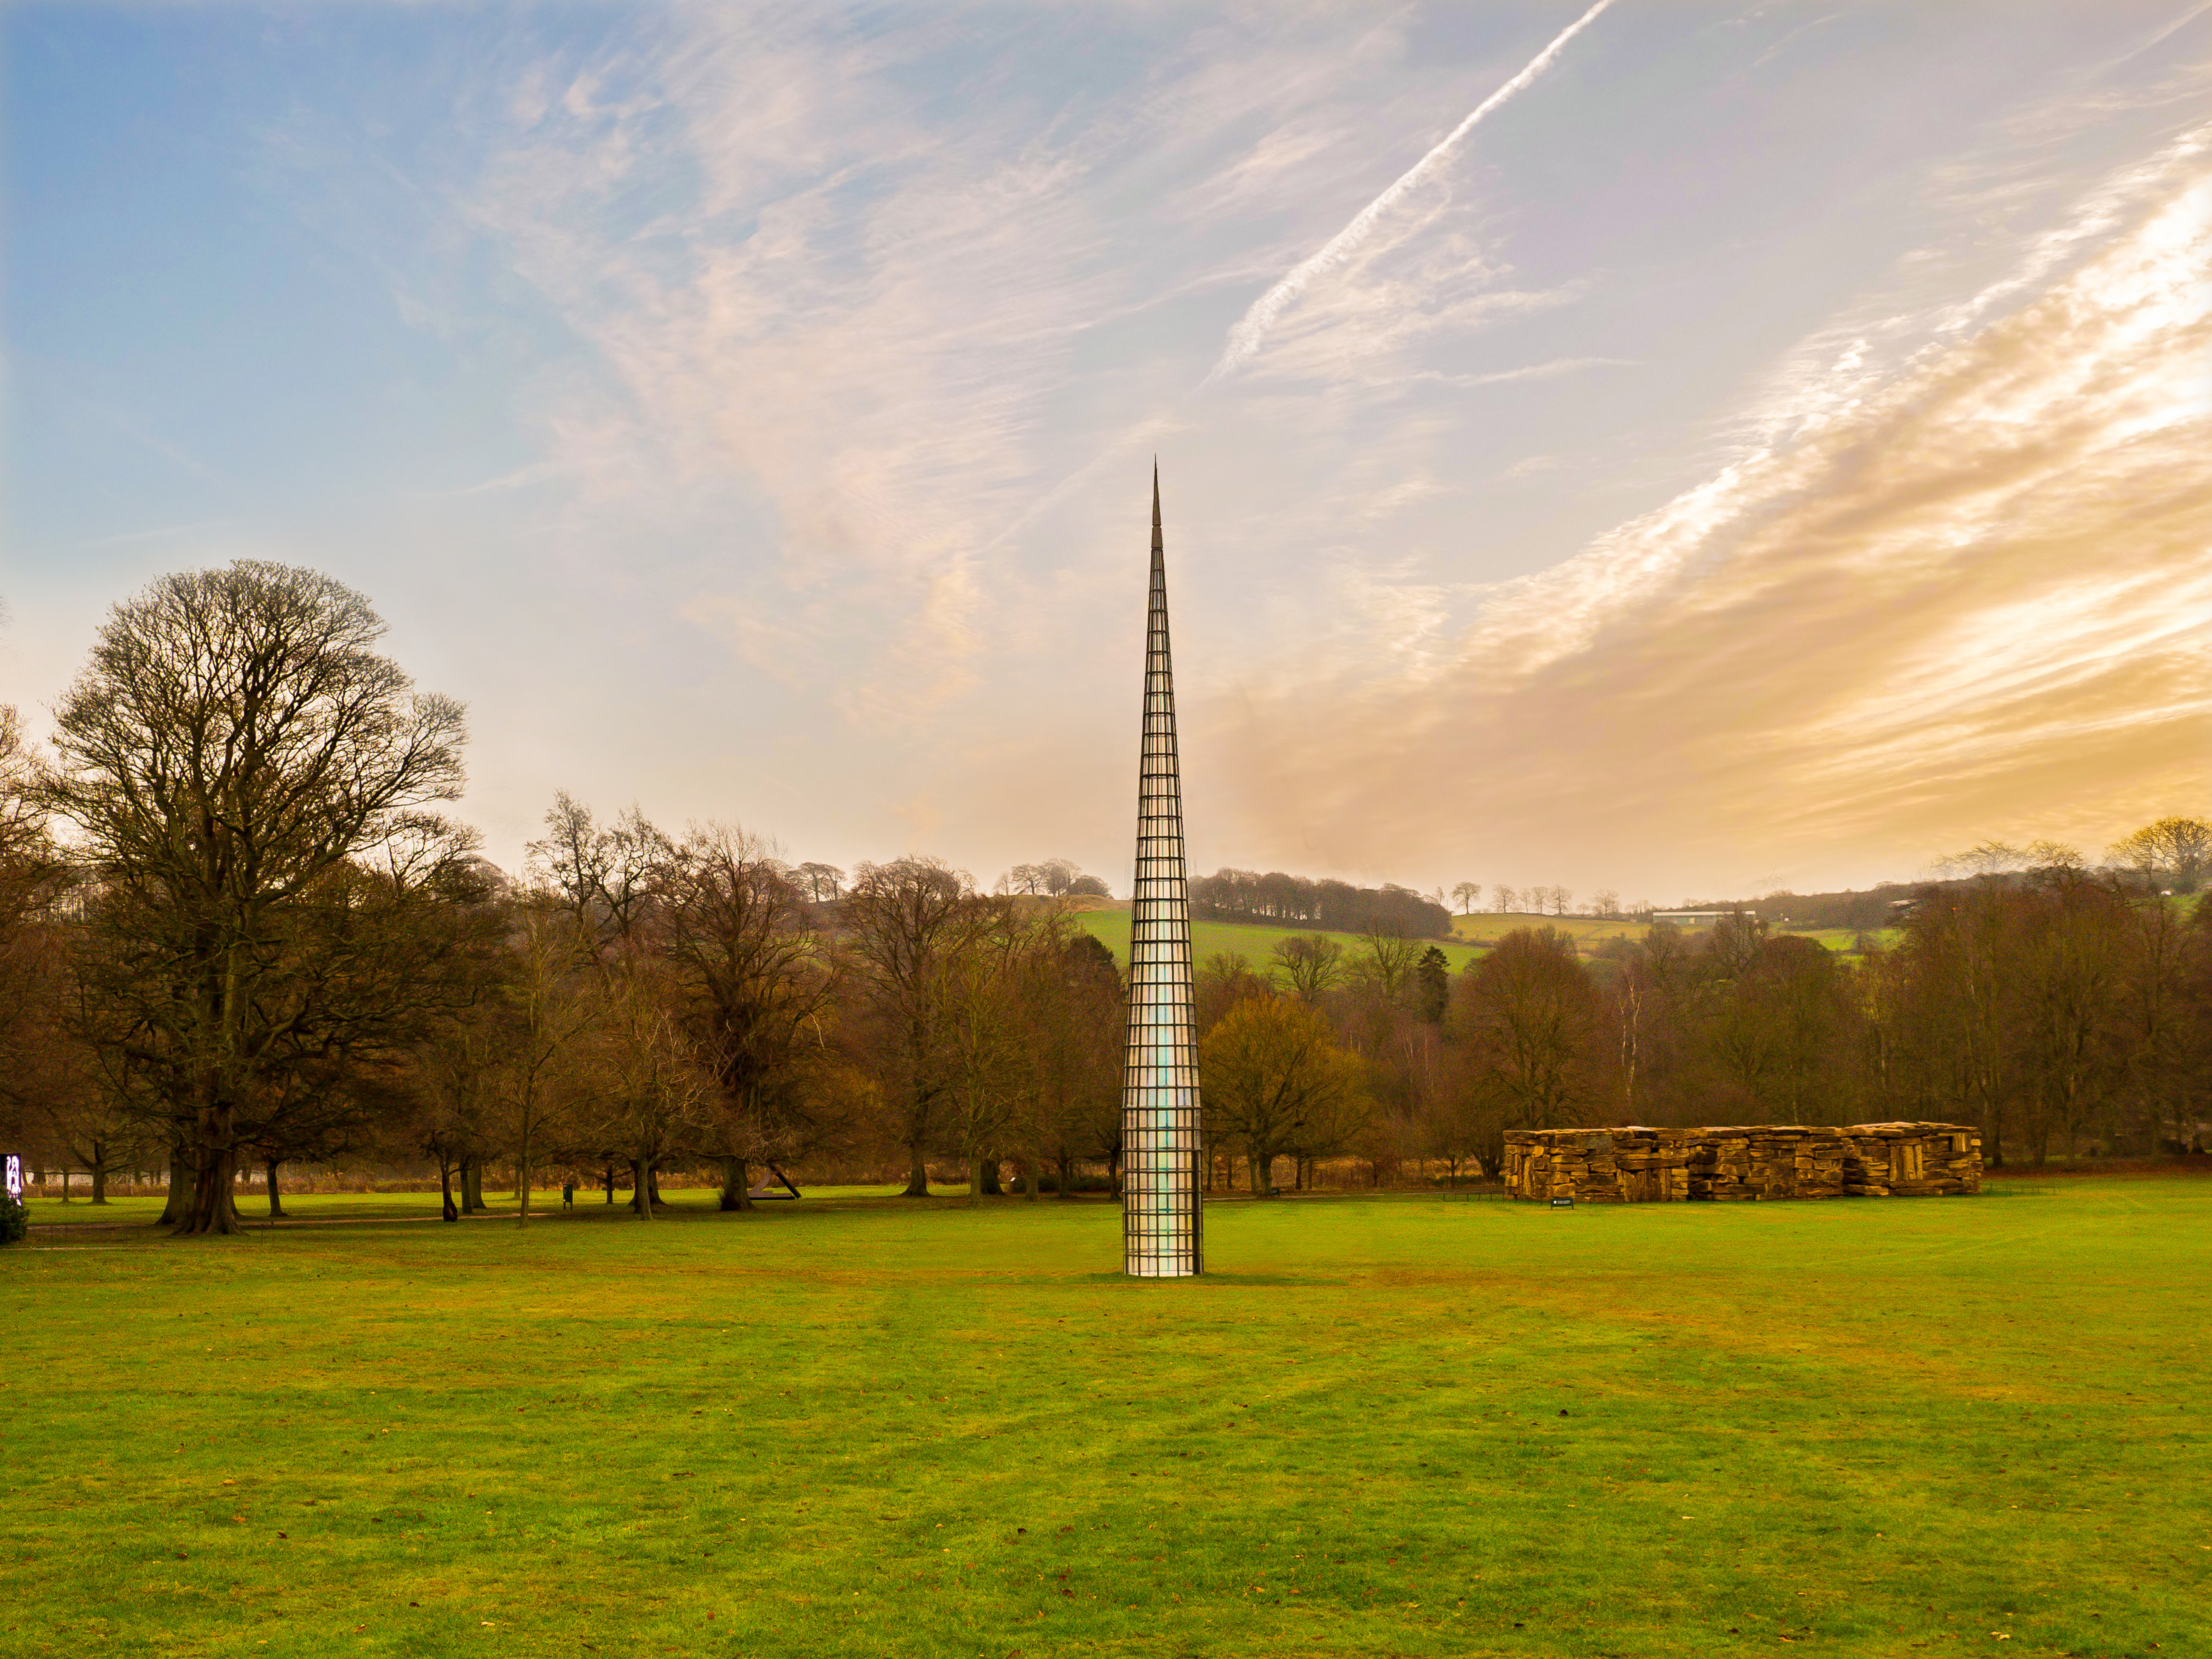 Installing Kimsooja – A Needle Woman 2014 at Yorkshire Sculpture Park